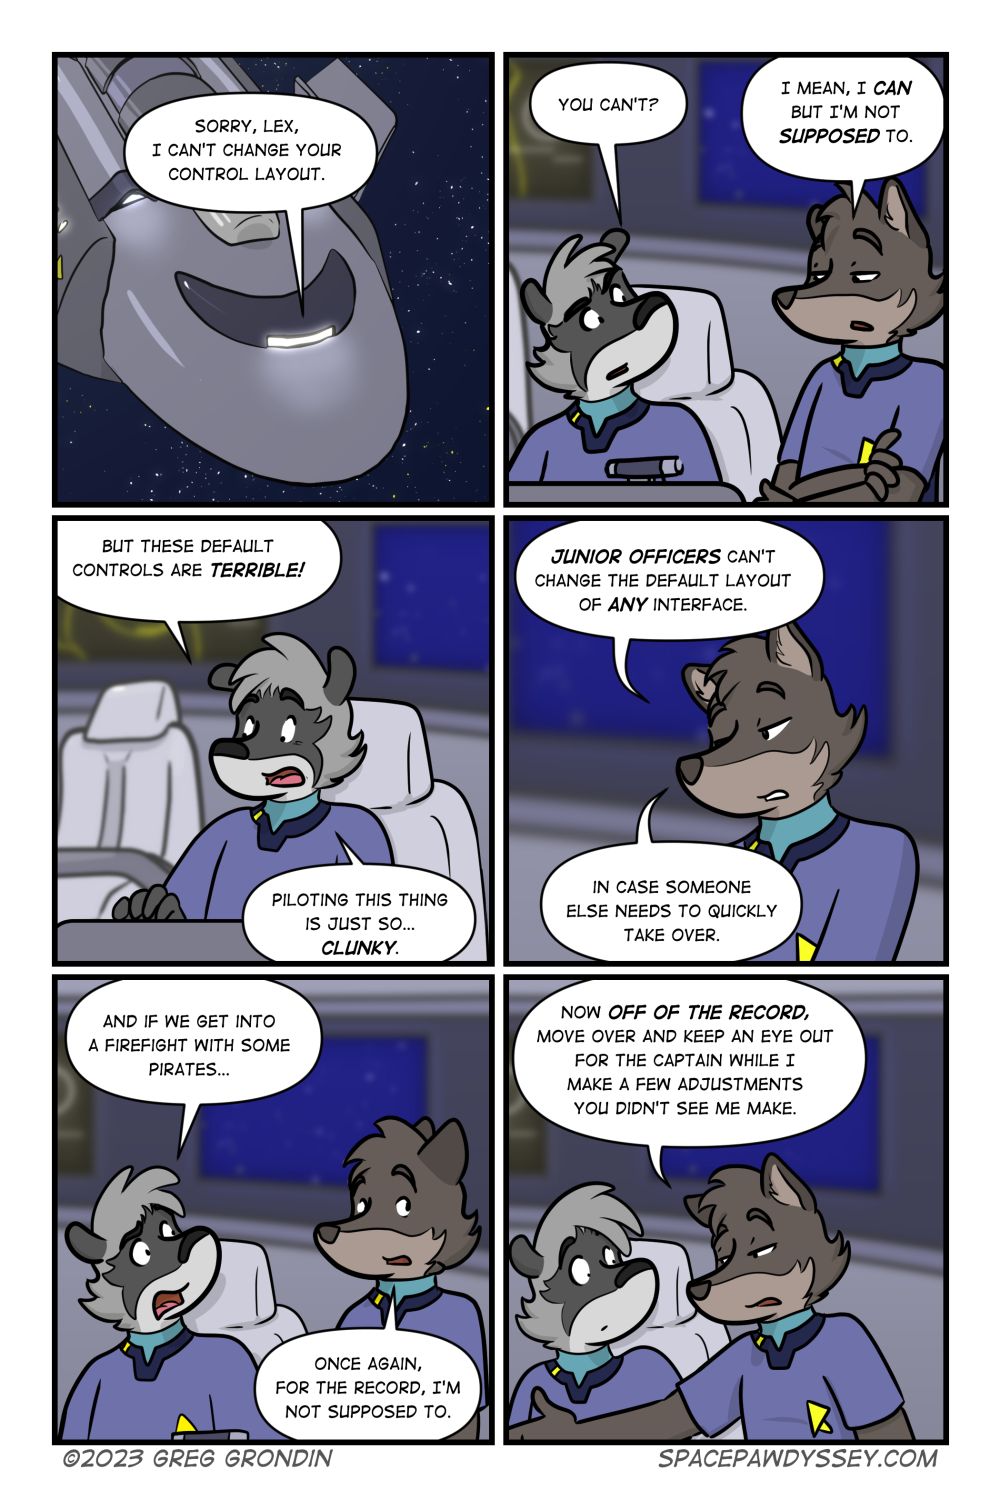 Space Pawdyssey #609